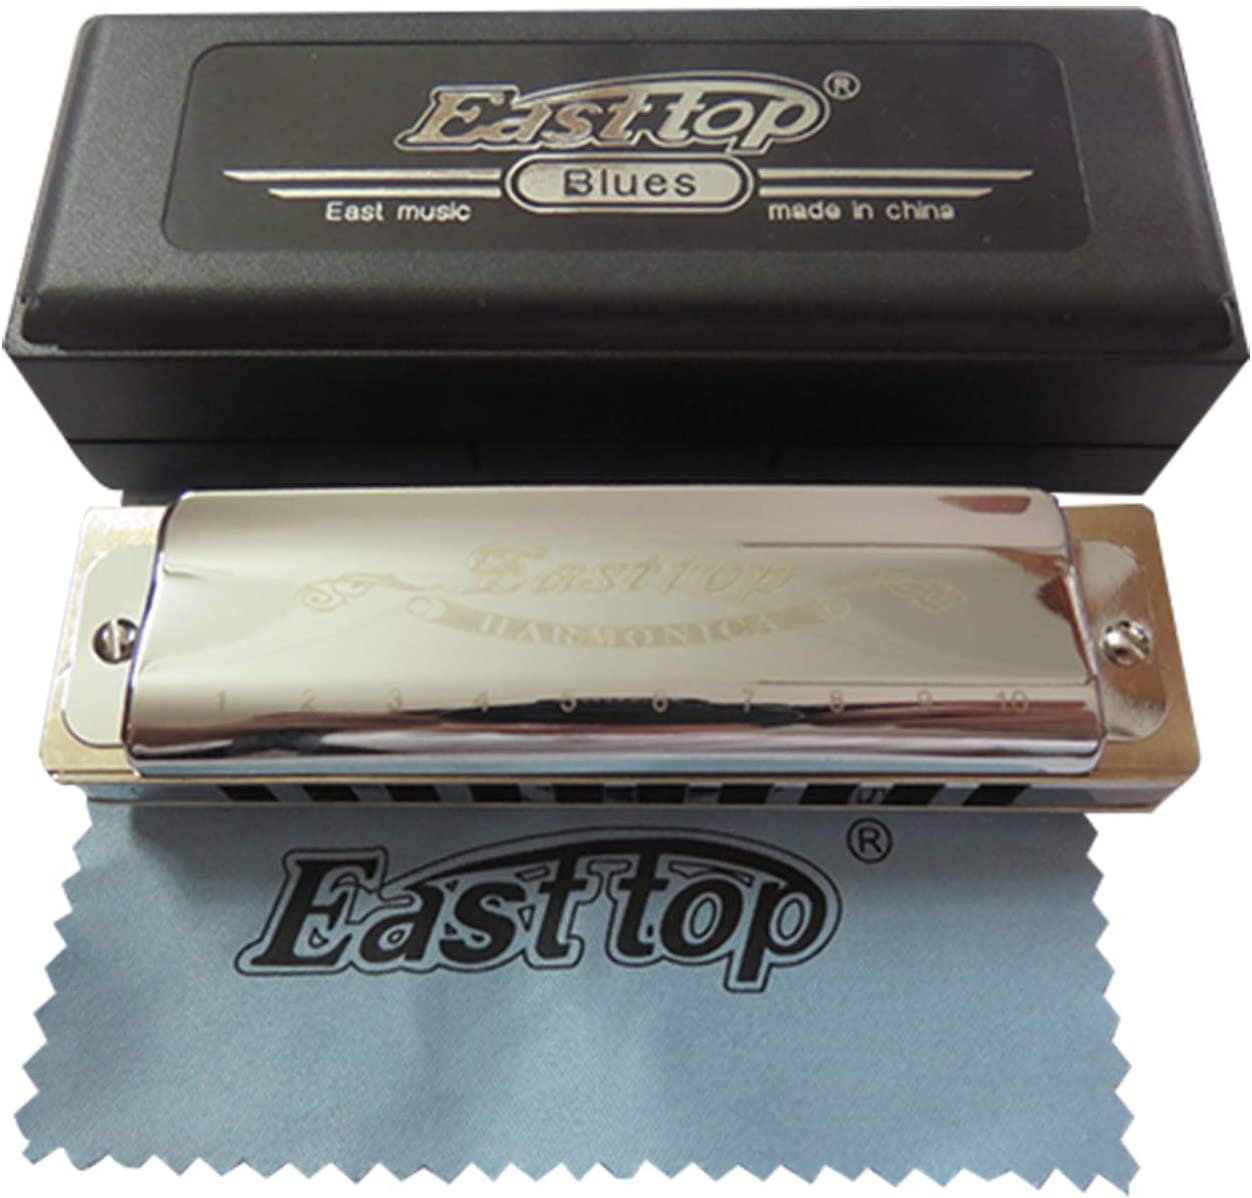 East top 10 Holes Professional Blues C Key Harmonica with Brass Comb, Harmonica with Case for Professional Player and Students (T006) - Easttop harmonica store